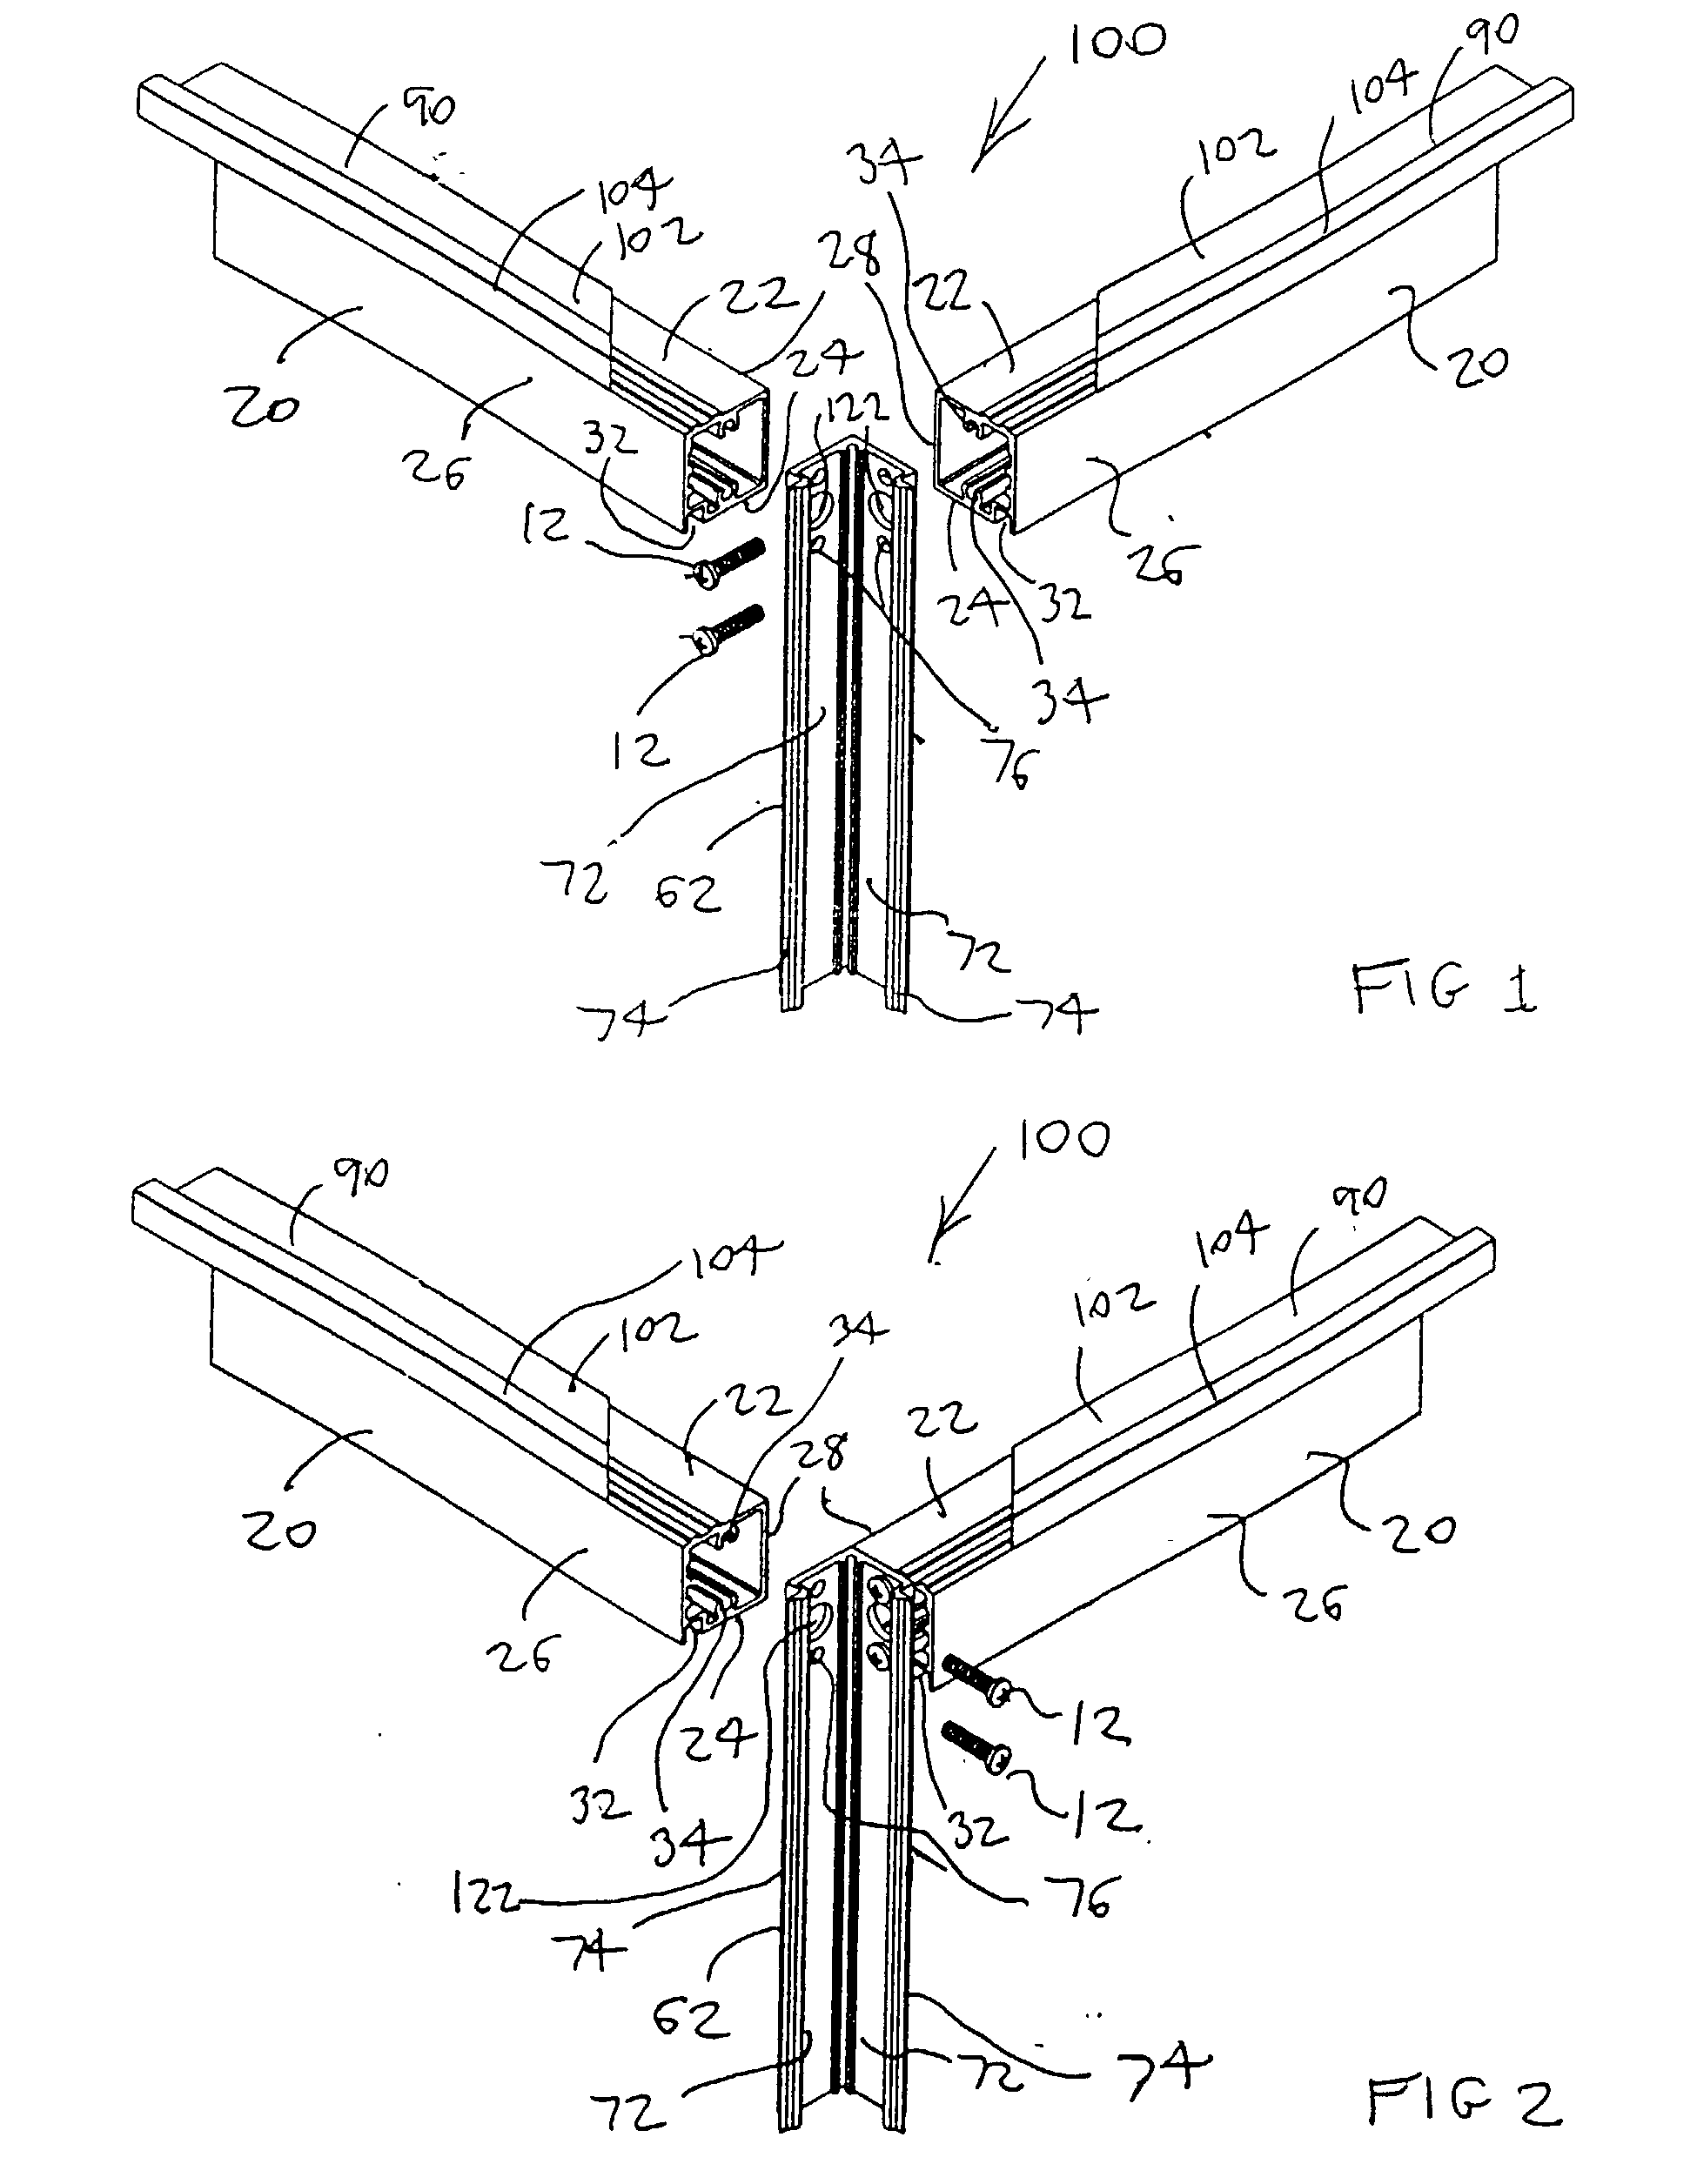 Display case assembly system